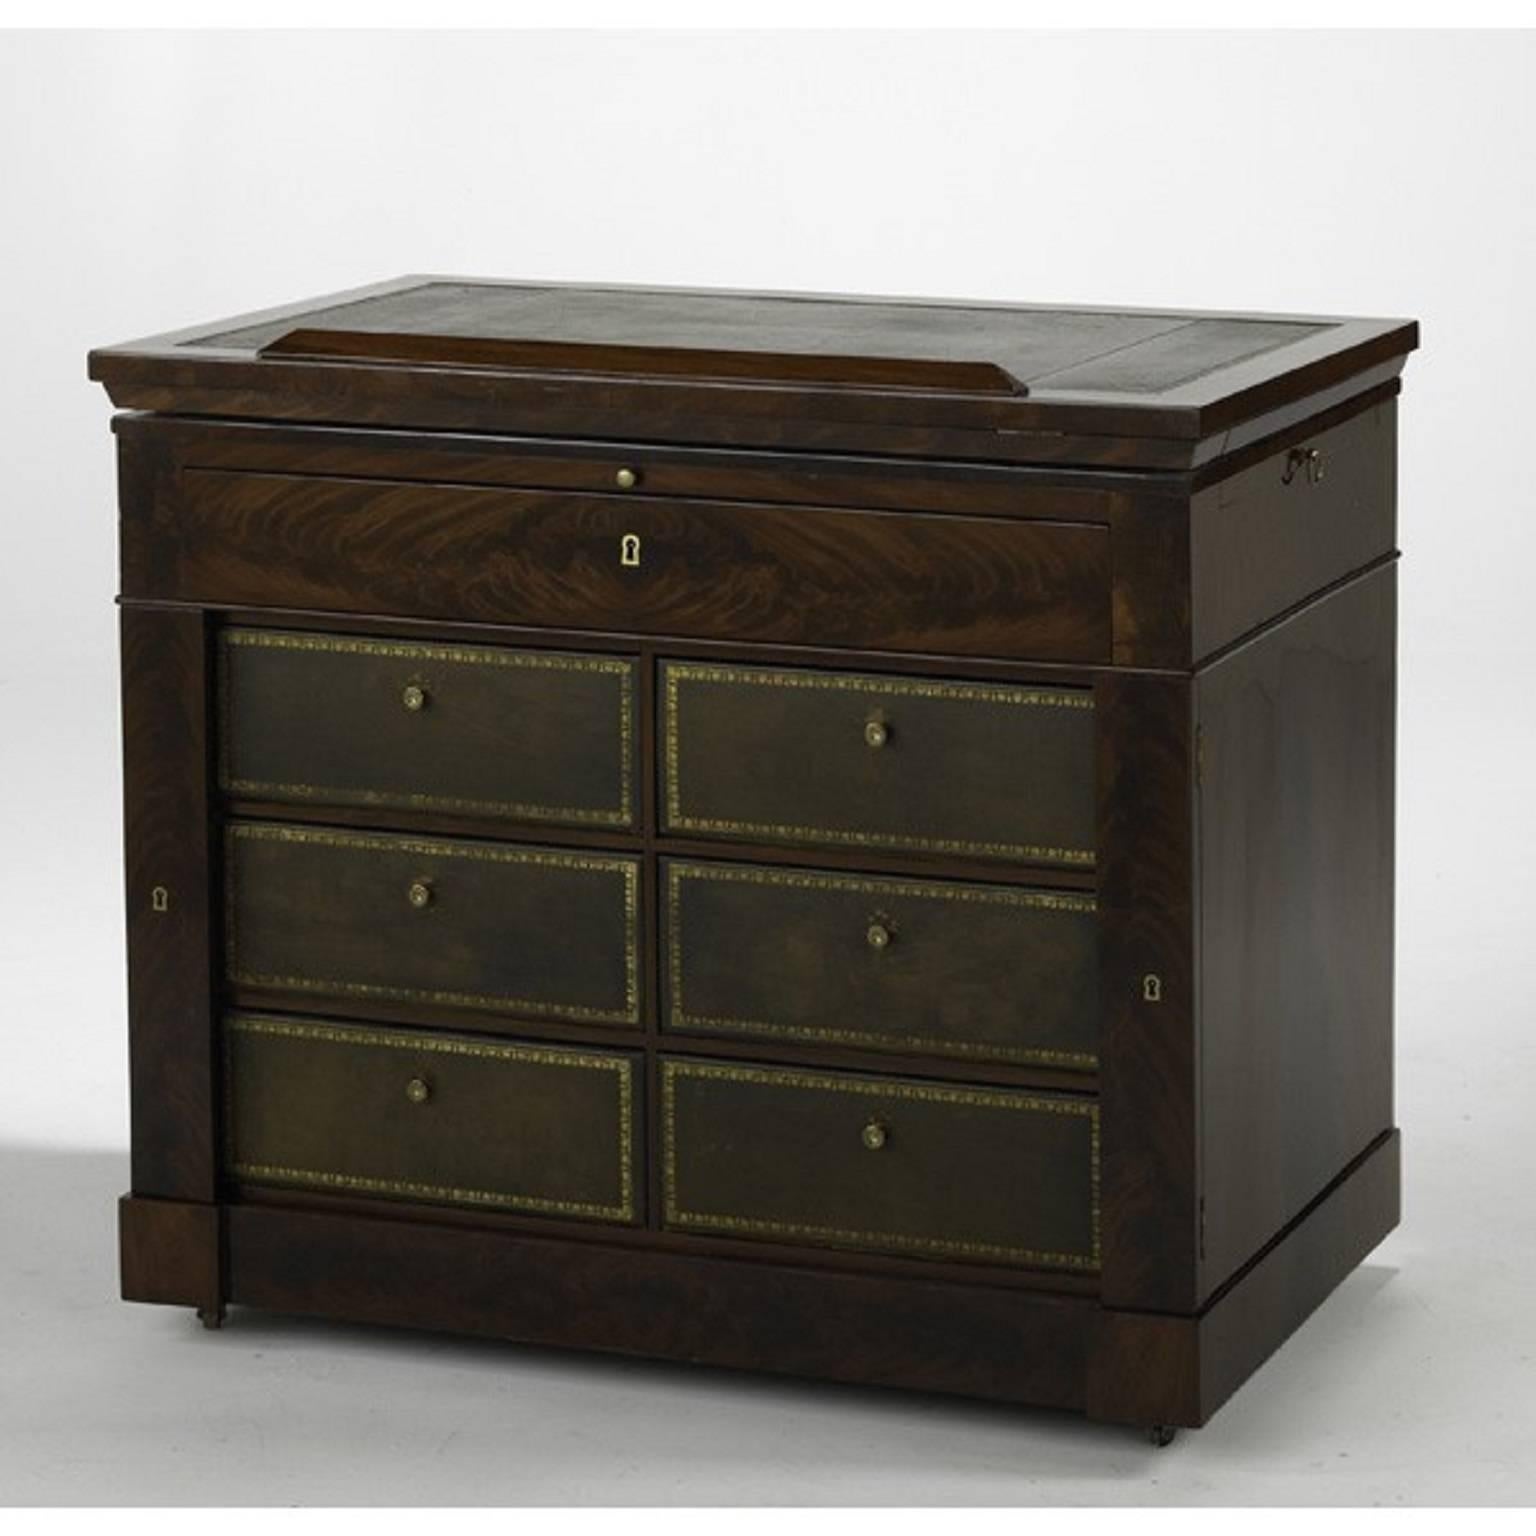 French Empire architect's desk. 

Flame grain mahogany veneers, leather covered drawers.